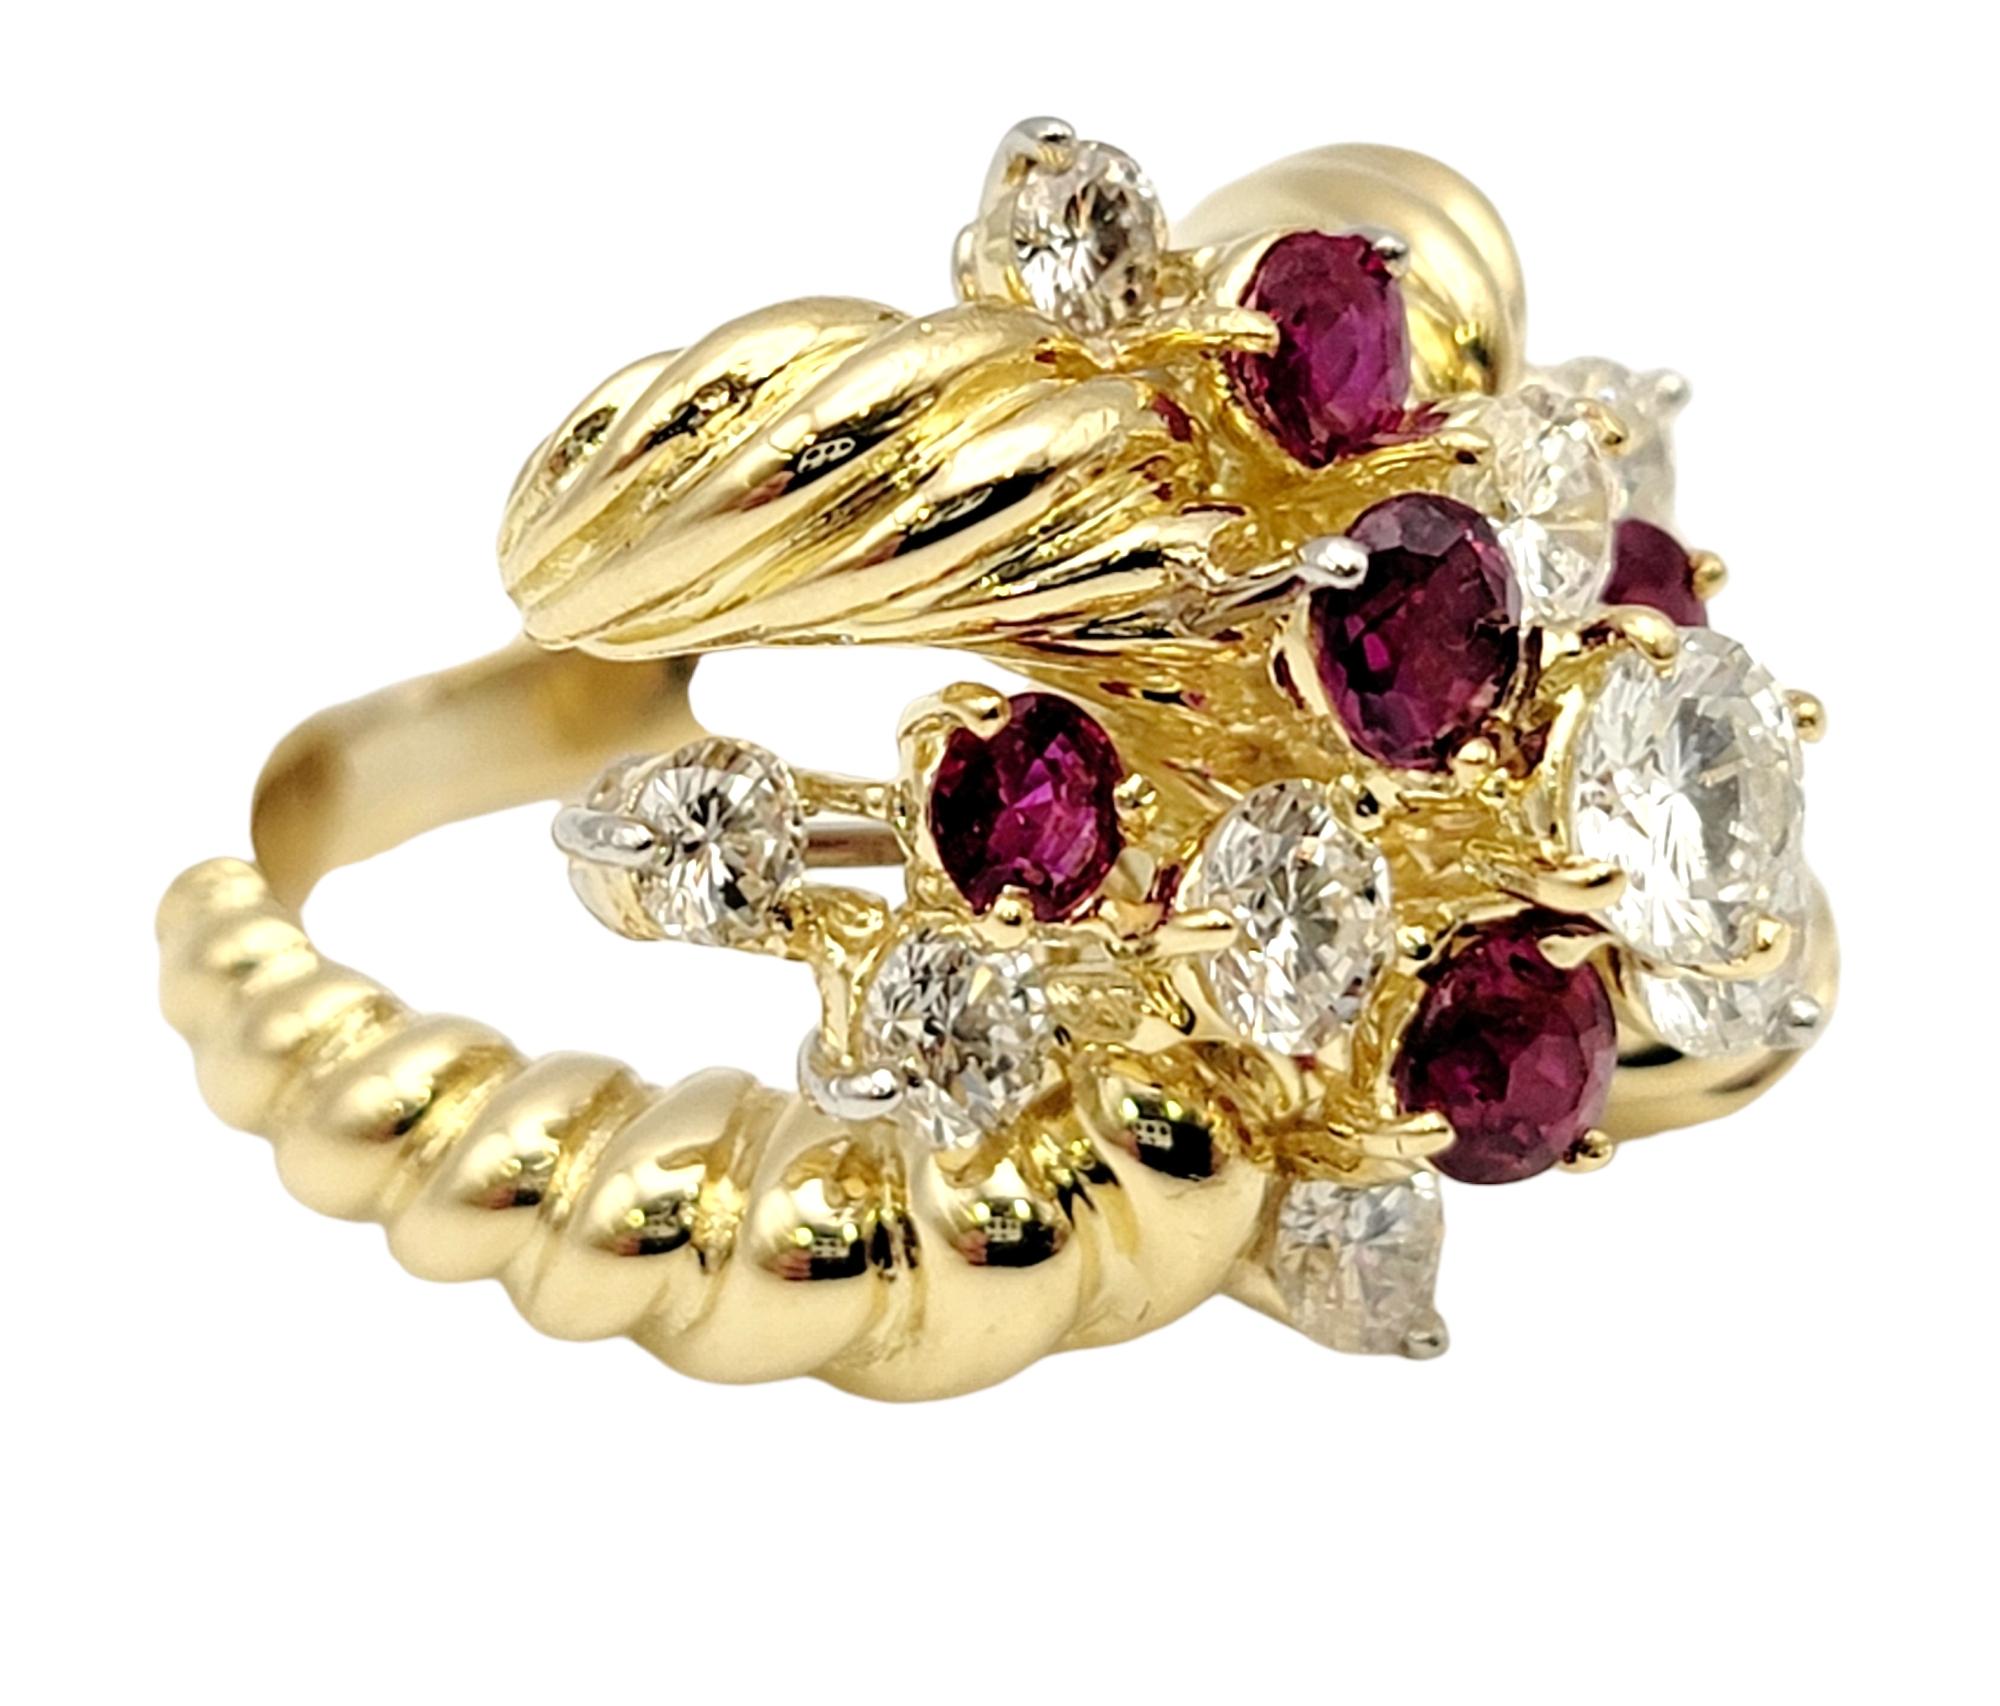 Vintage Diamond and Ruby Cluster Spray Ring 18 Karat Yellow Gold Crossover Style In Good Condition For Sale In Scottsdale, AZ